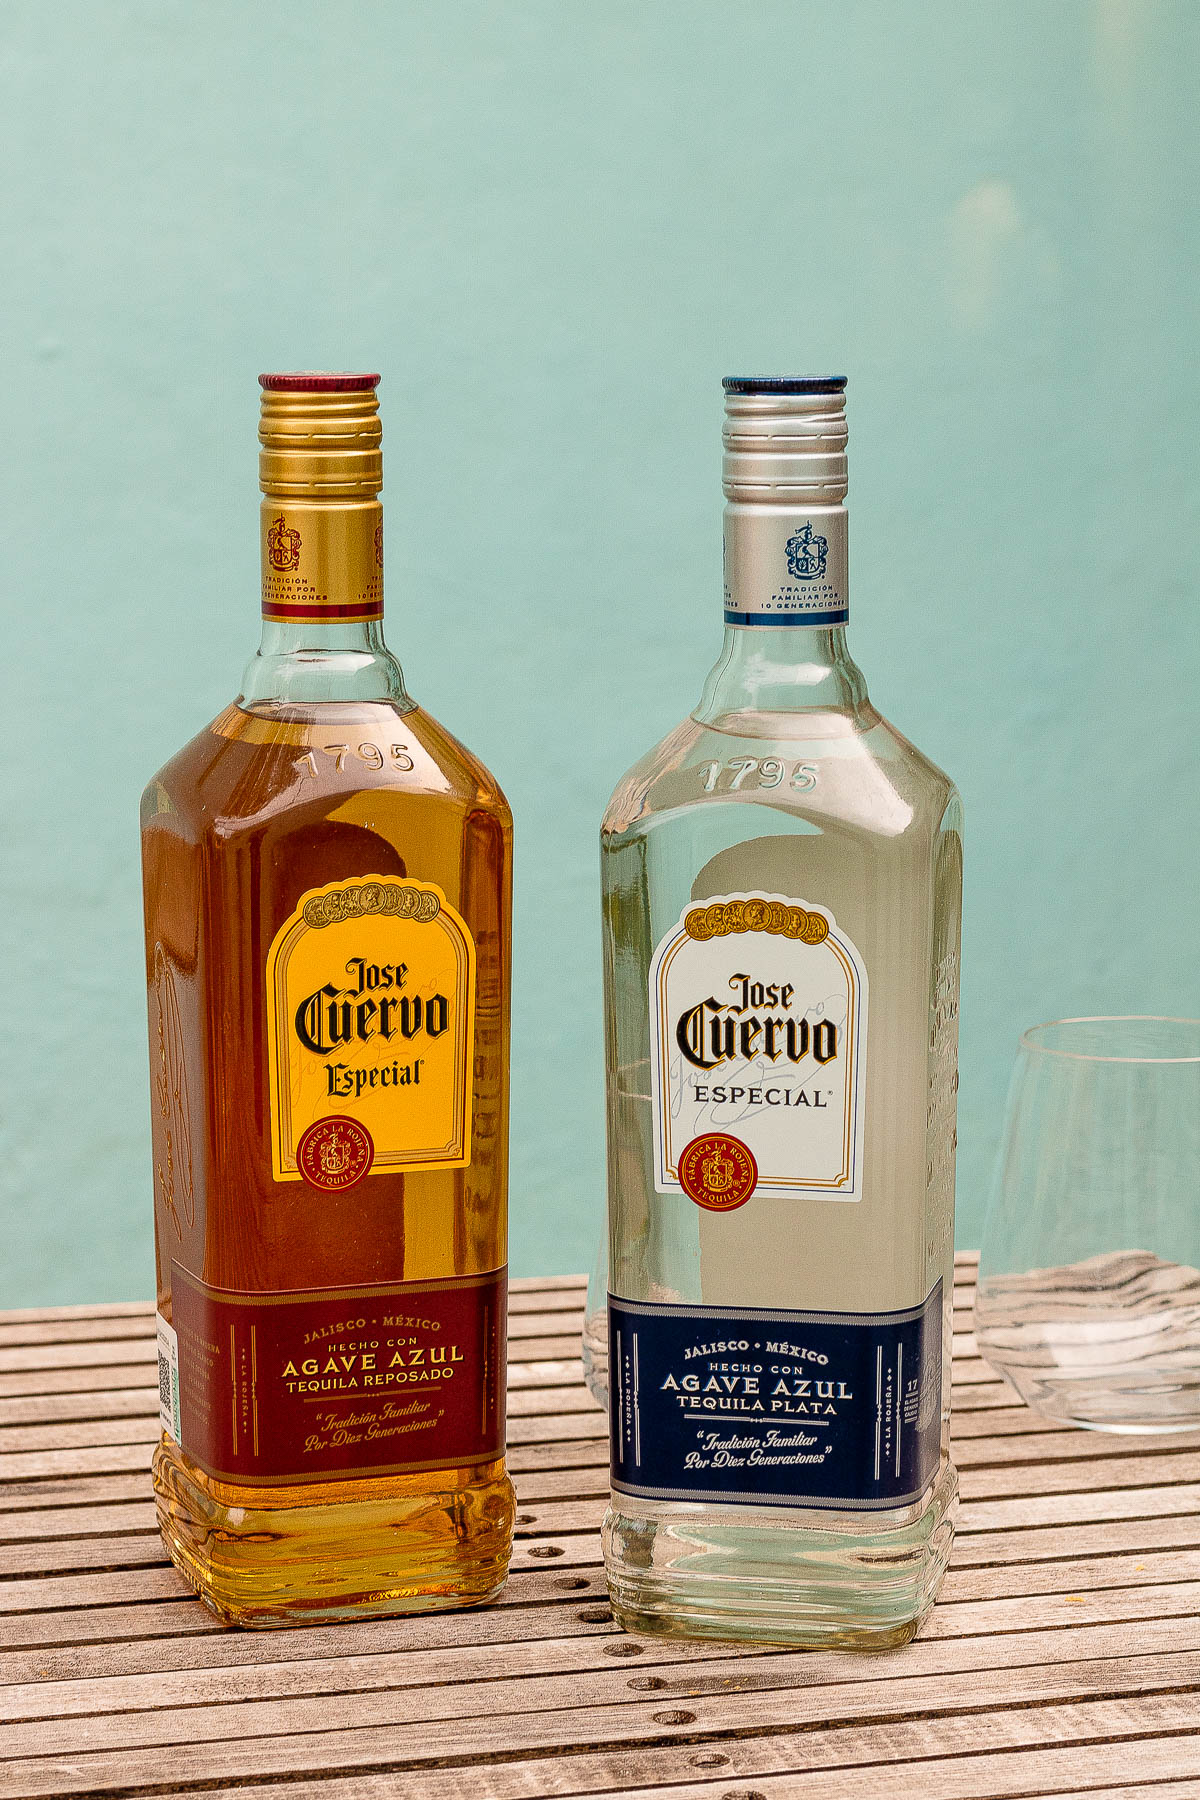 Two bottles of tequila, one aged and one silver.